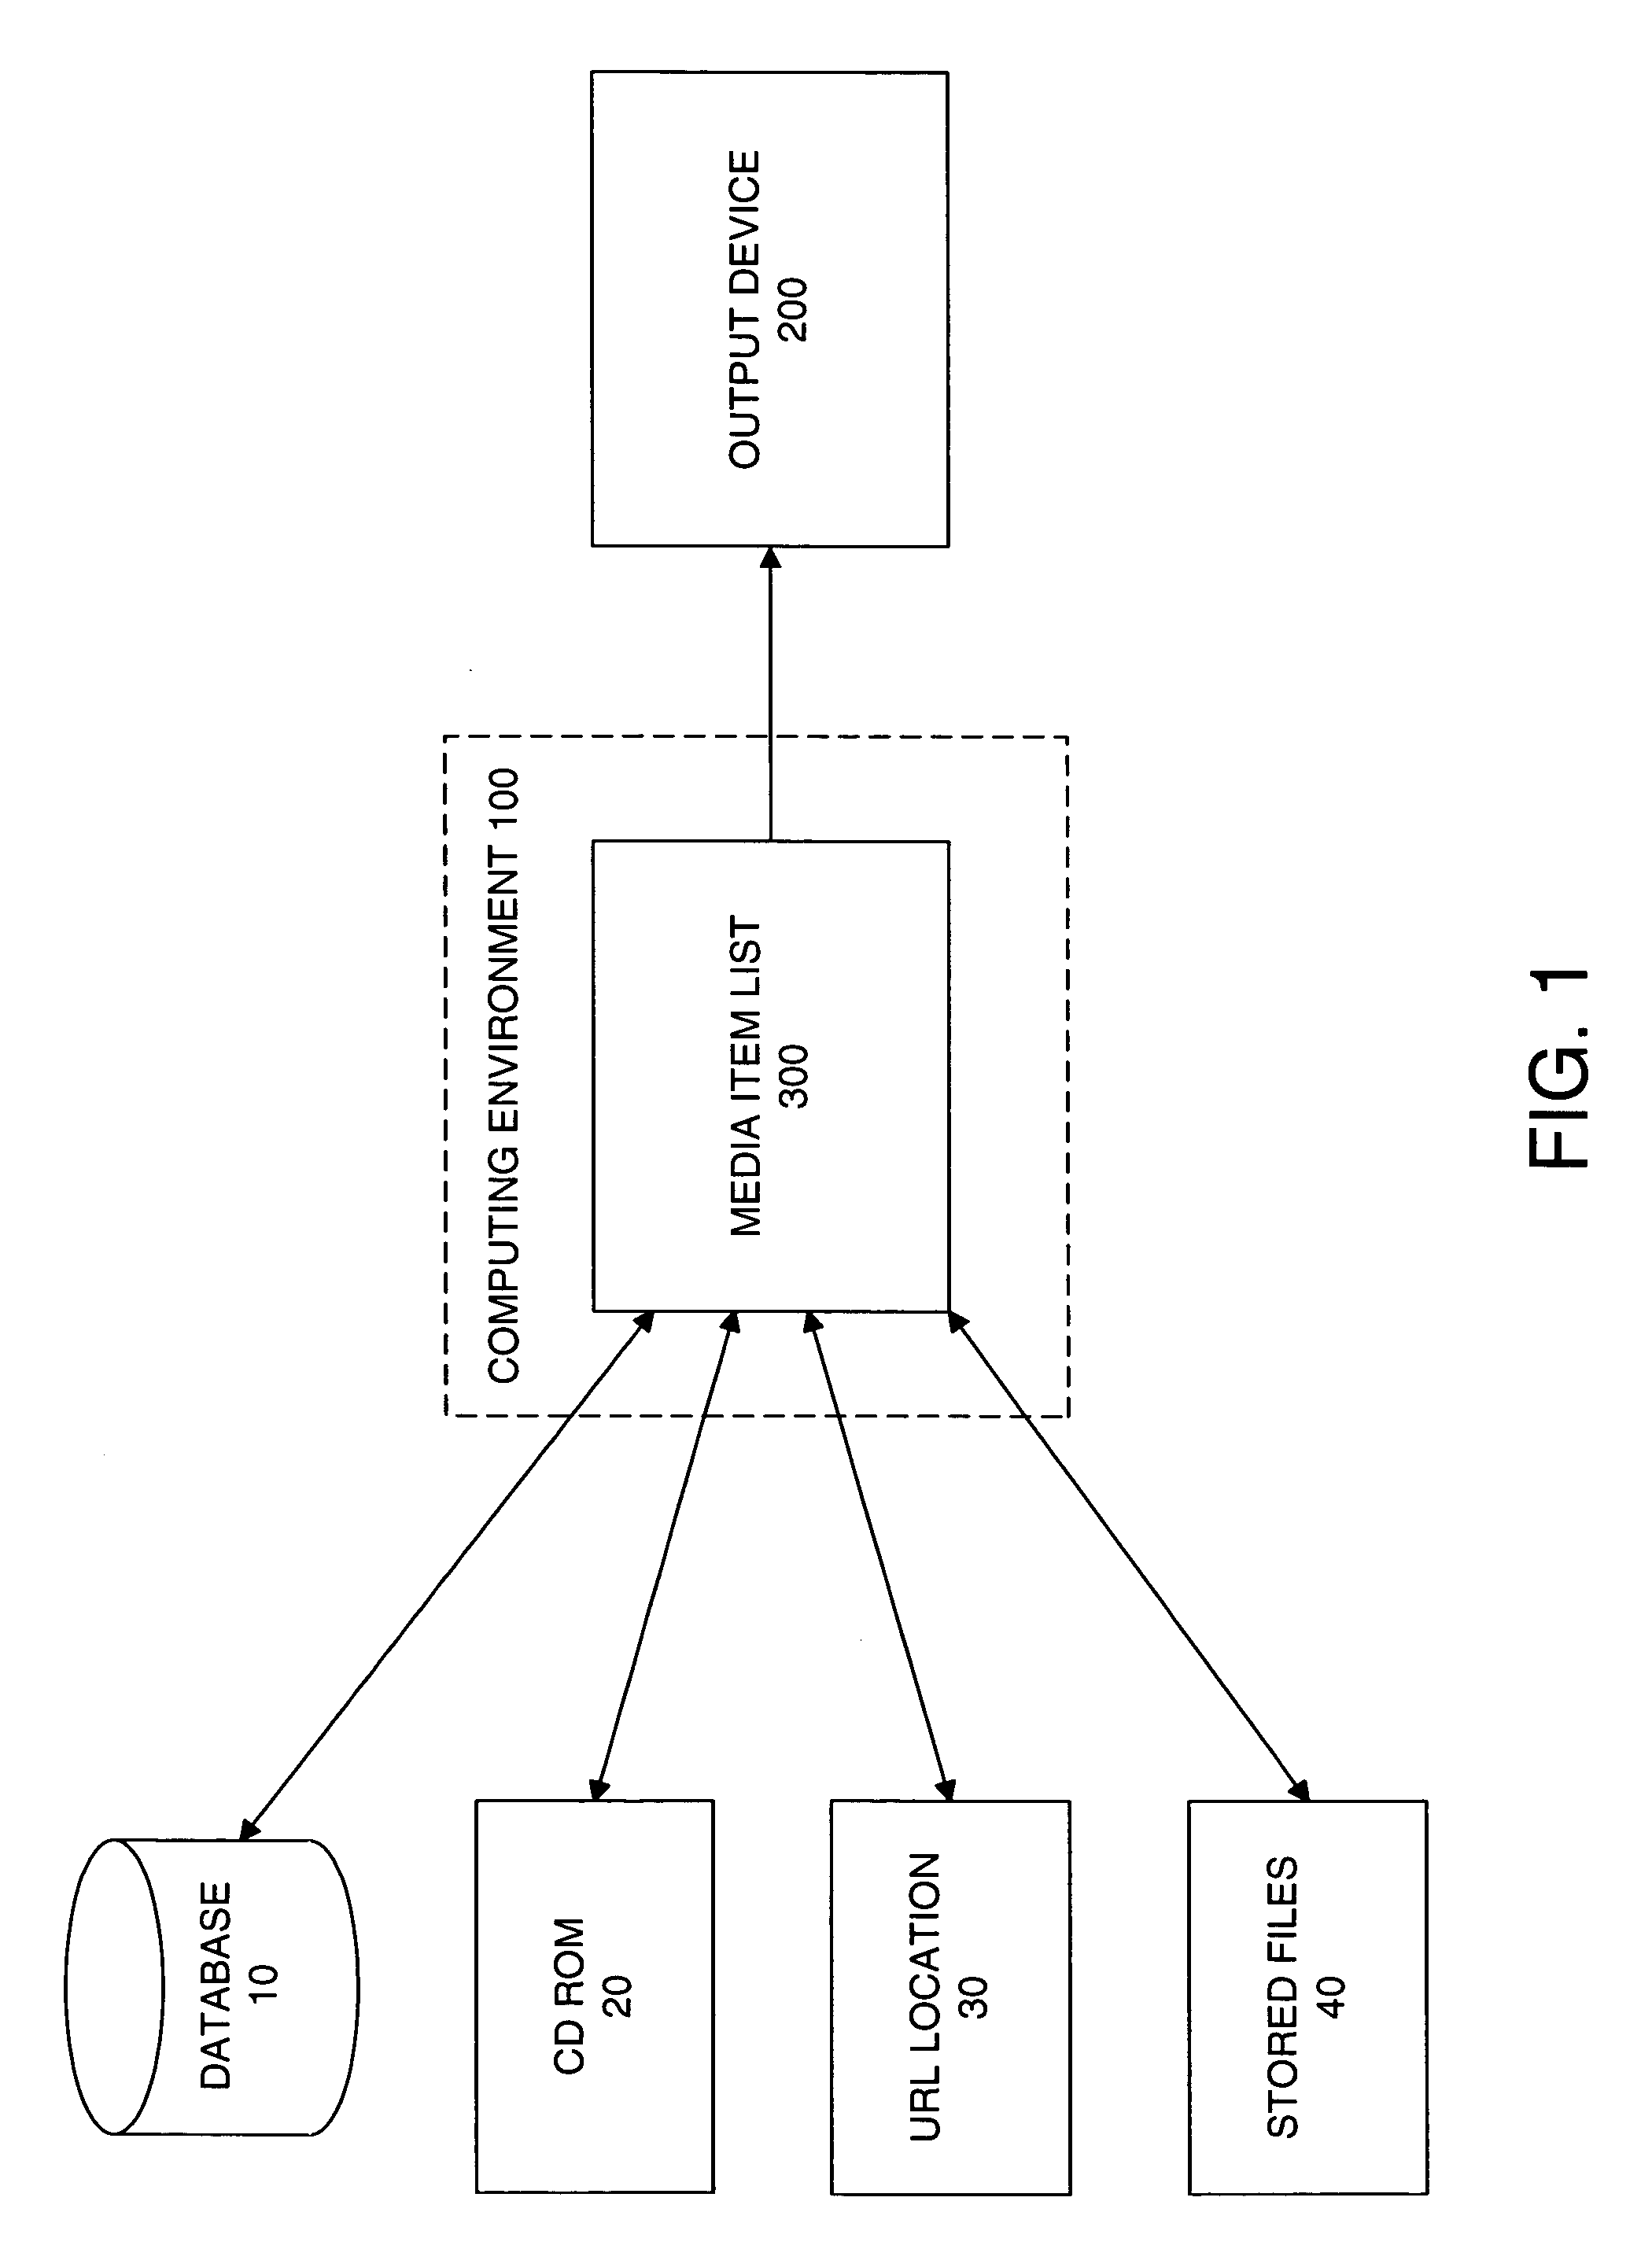 System and method for selection of media items